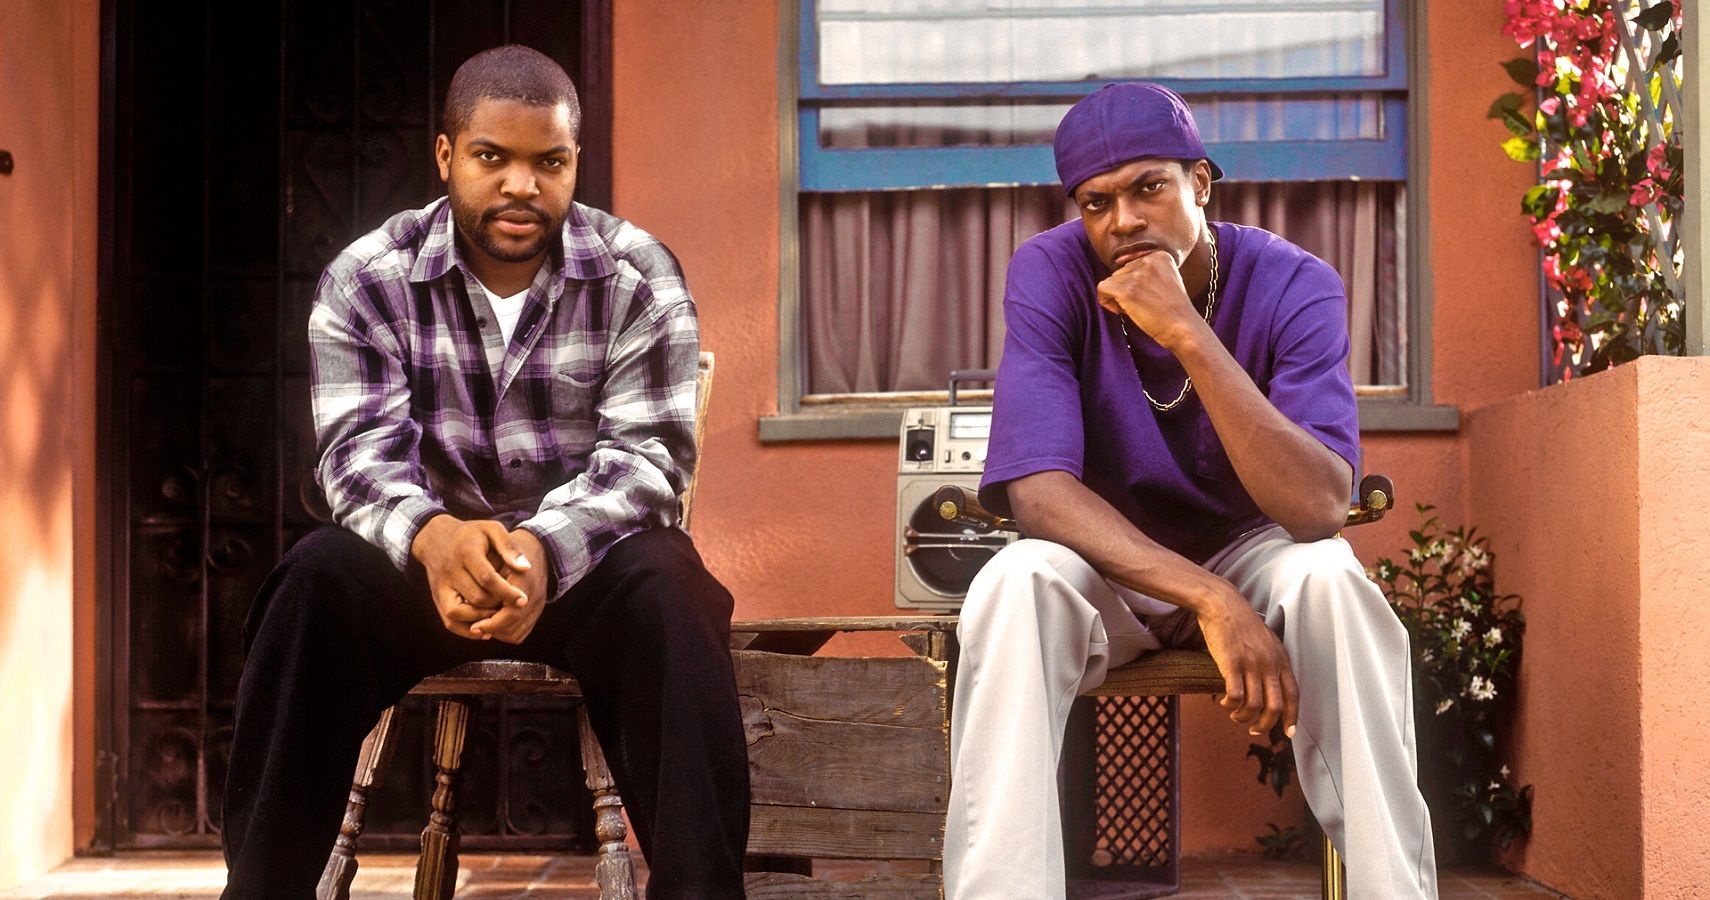 10 BehindTheScenes Facts About The Making Of Friday